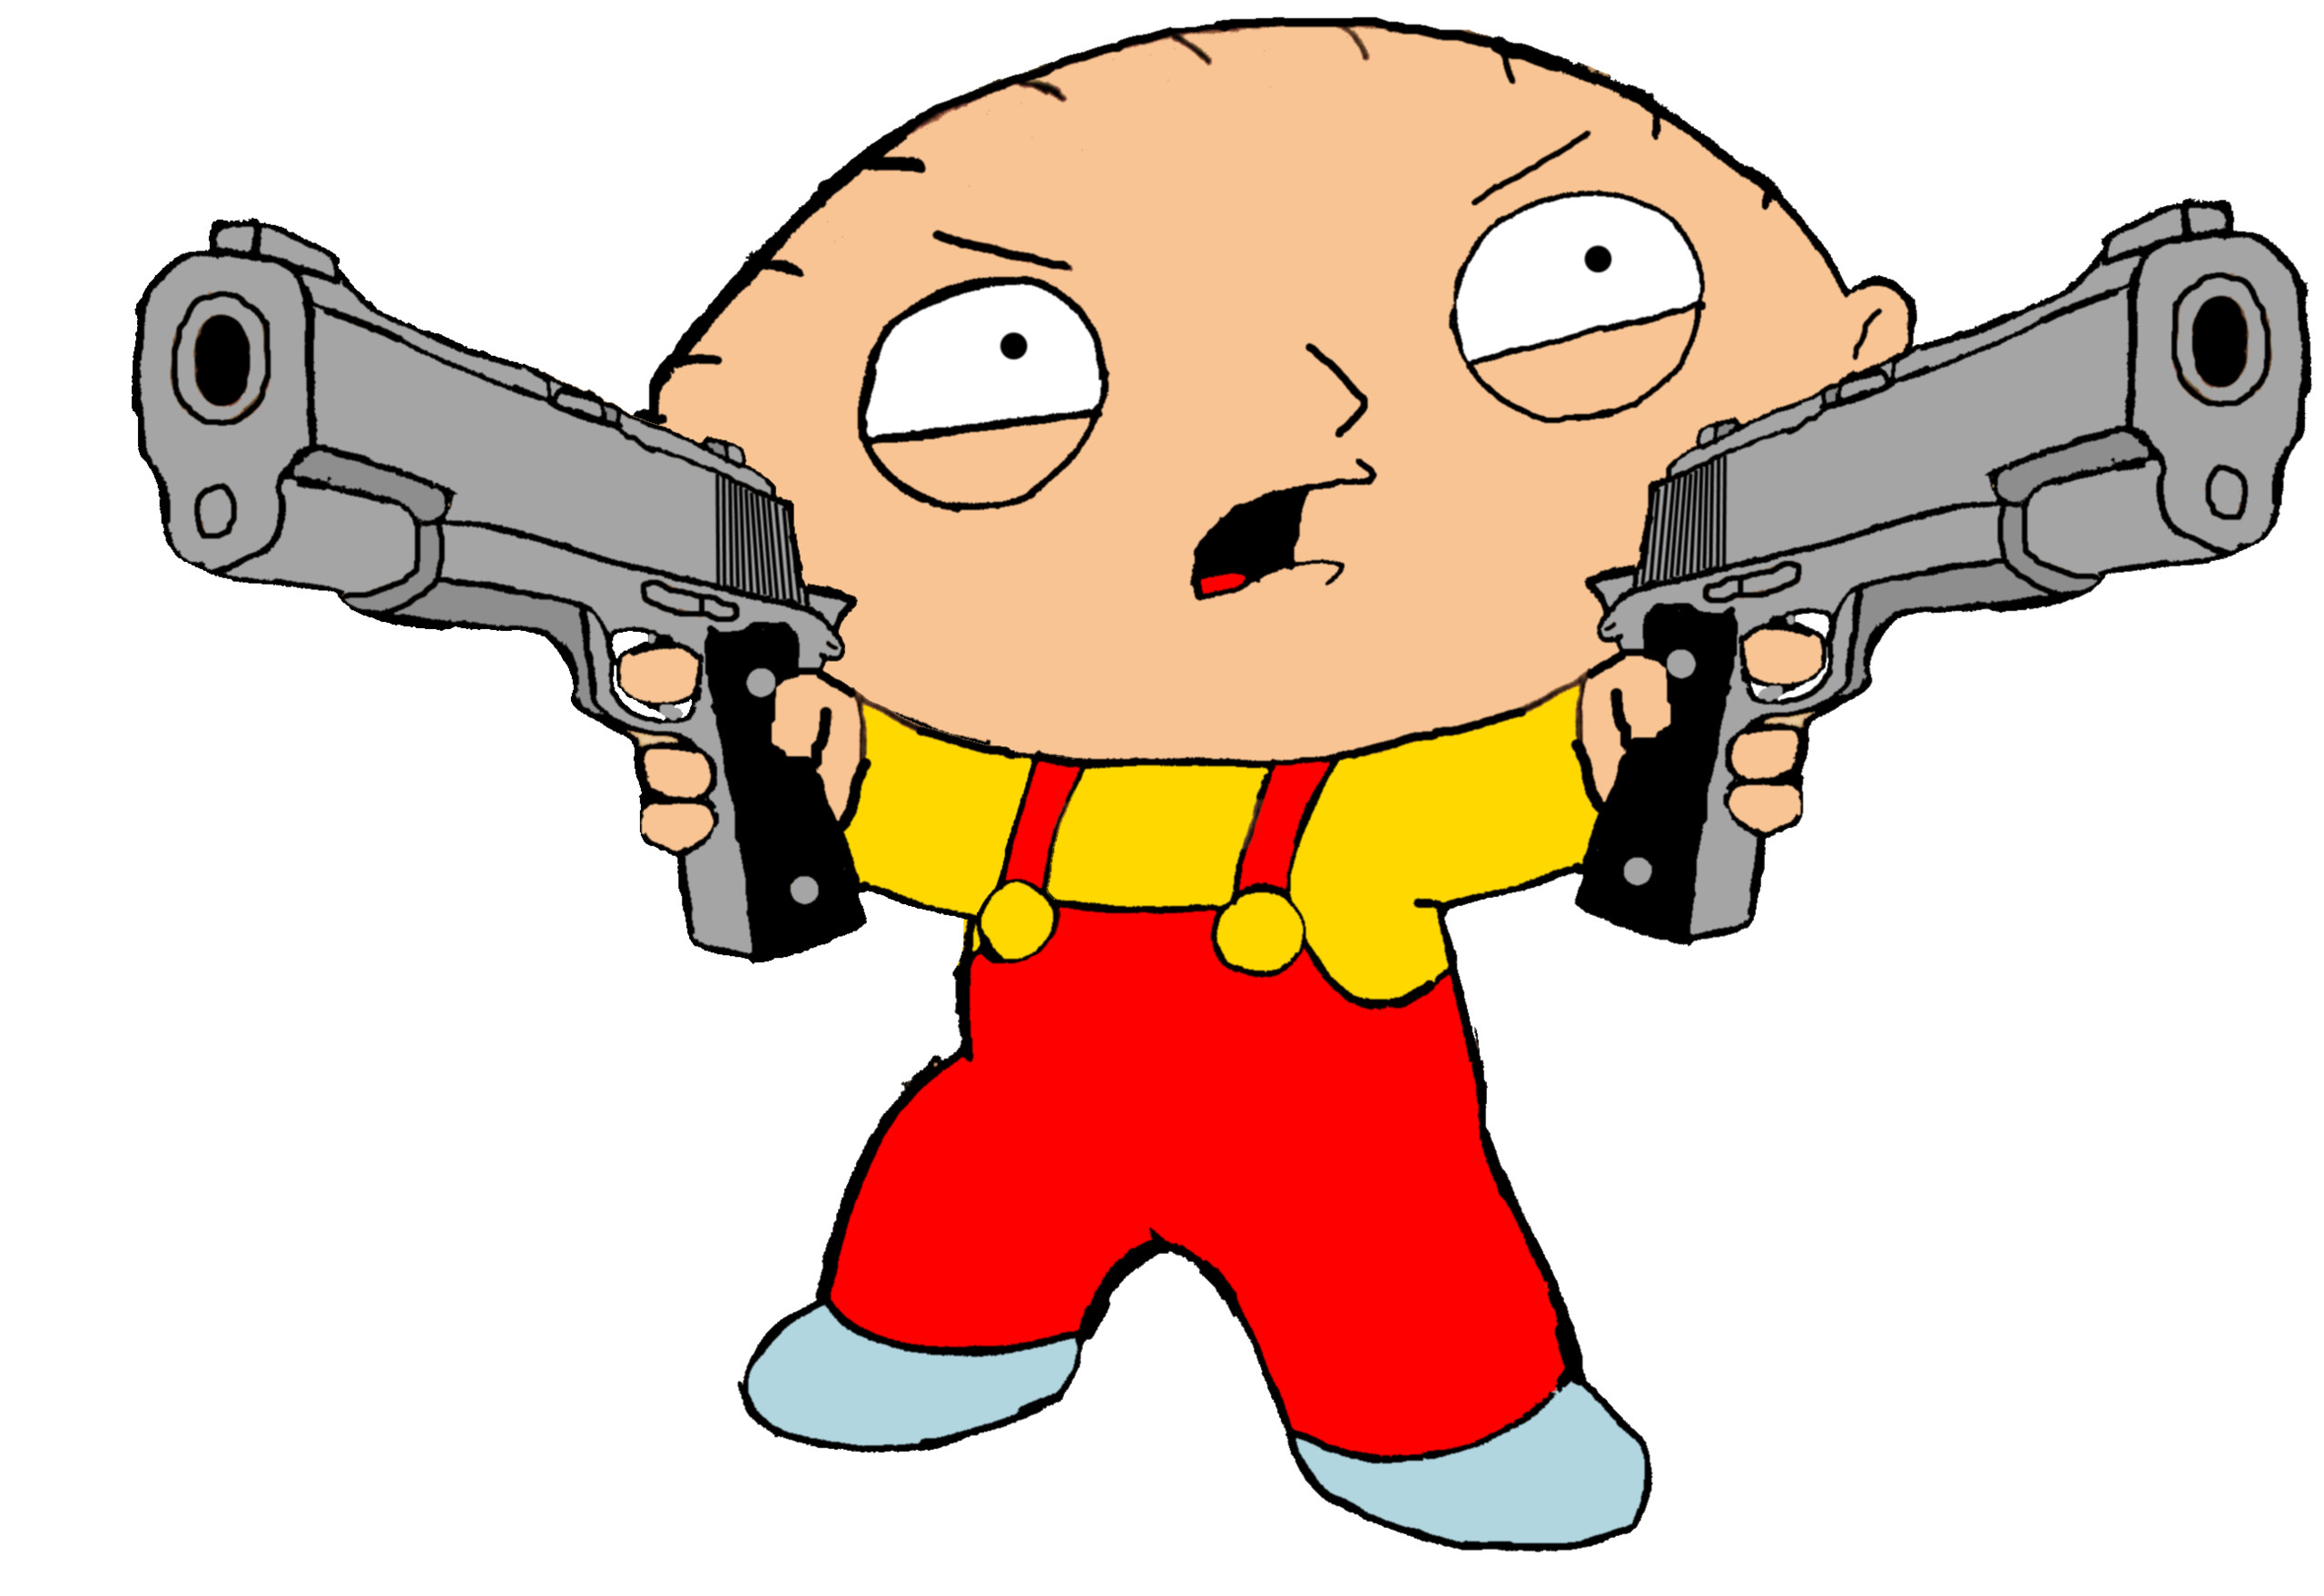 Family Guy Wallpaper  iXpap  Family guy stewie icon Family guy stewie  Family guy cartoon